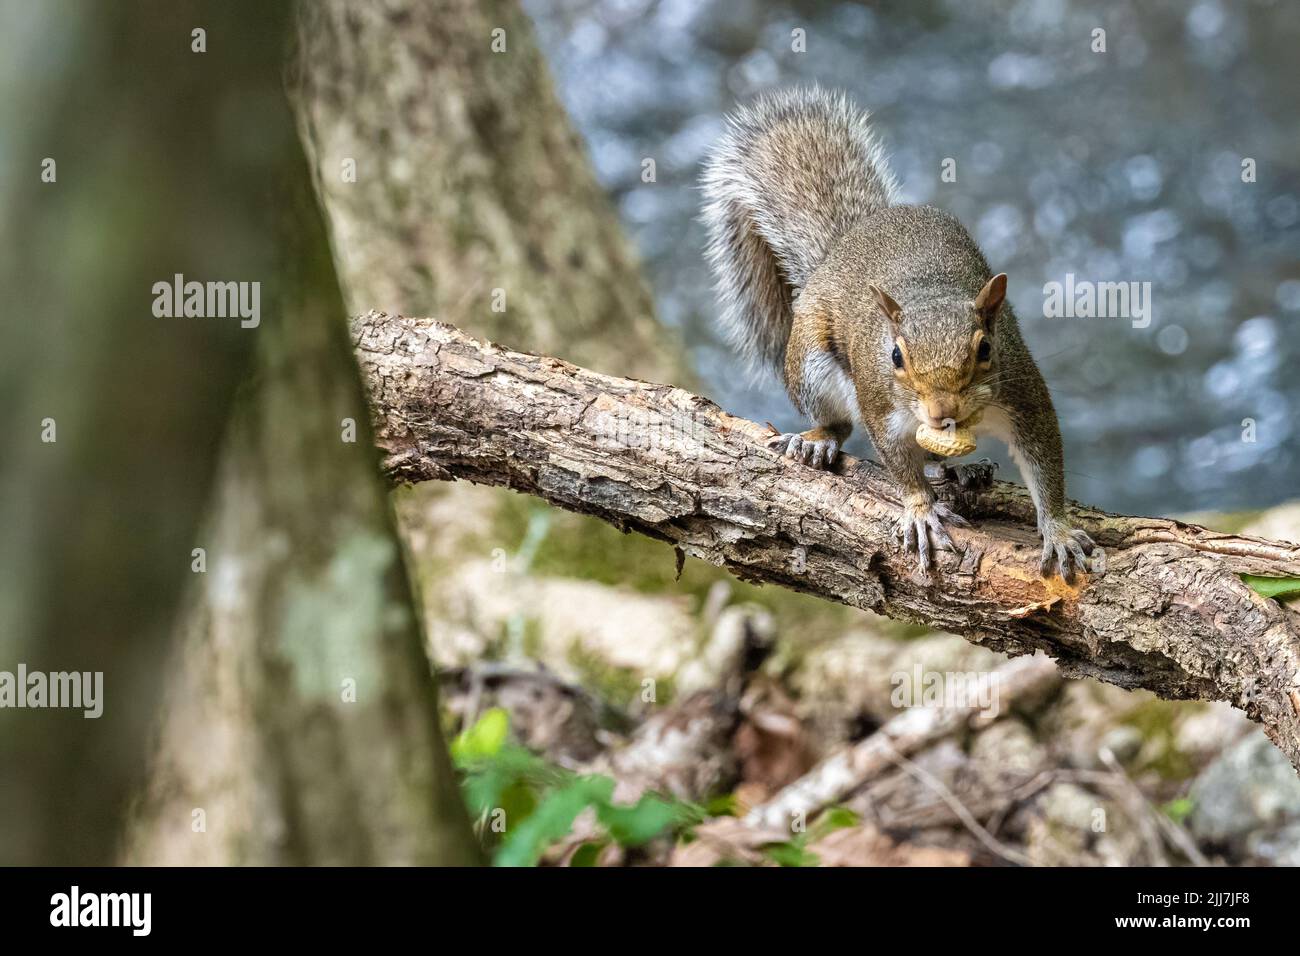 Eastern gray squirrel (Sciurus carolinensis), with two peanuts in its mouth, approaching on tree limb at Meeks Park in Blairsville, Georgia. (USA) Stock Photo